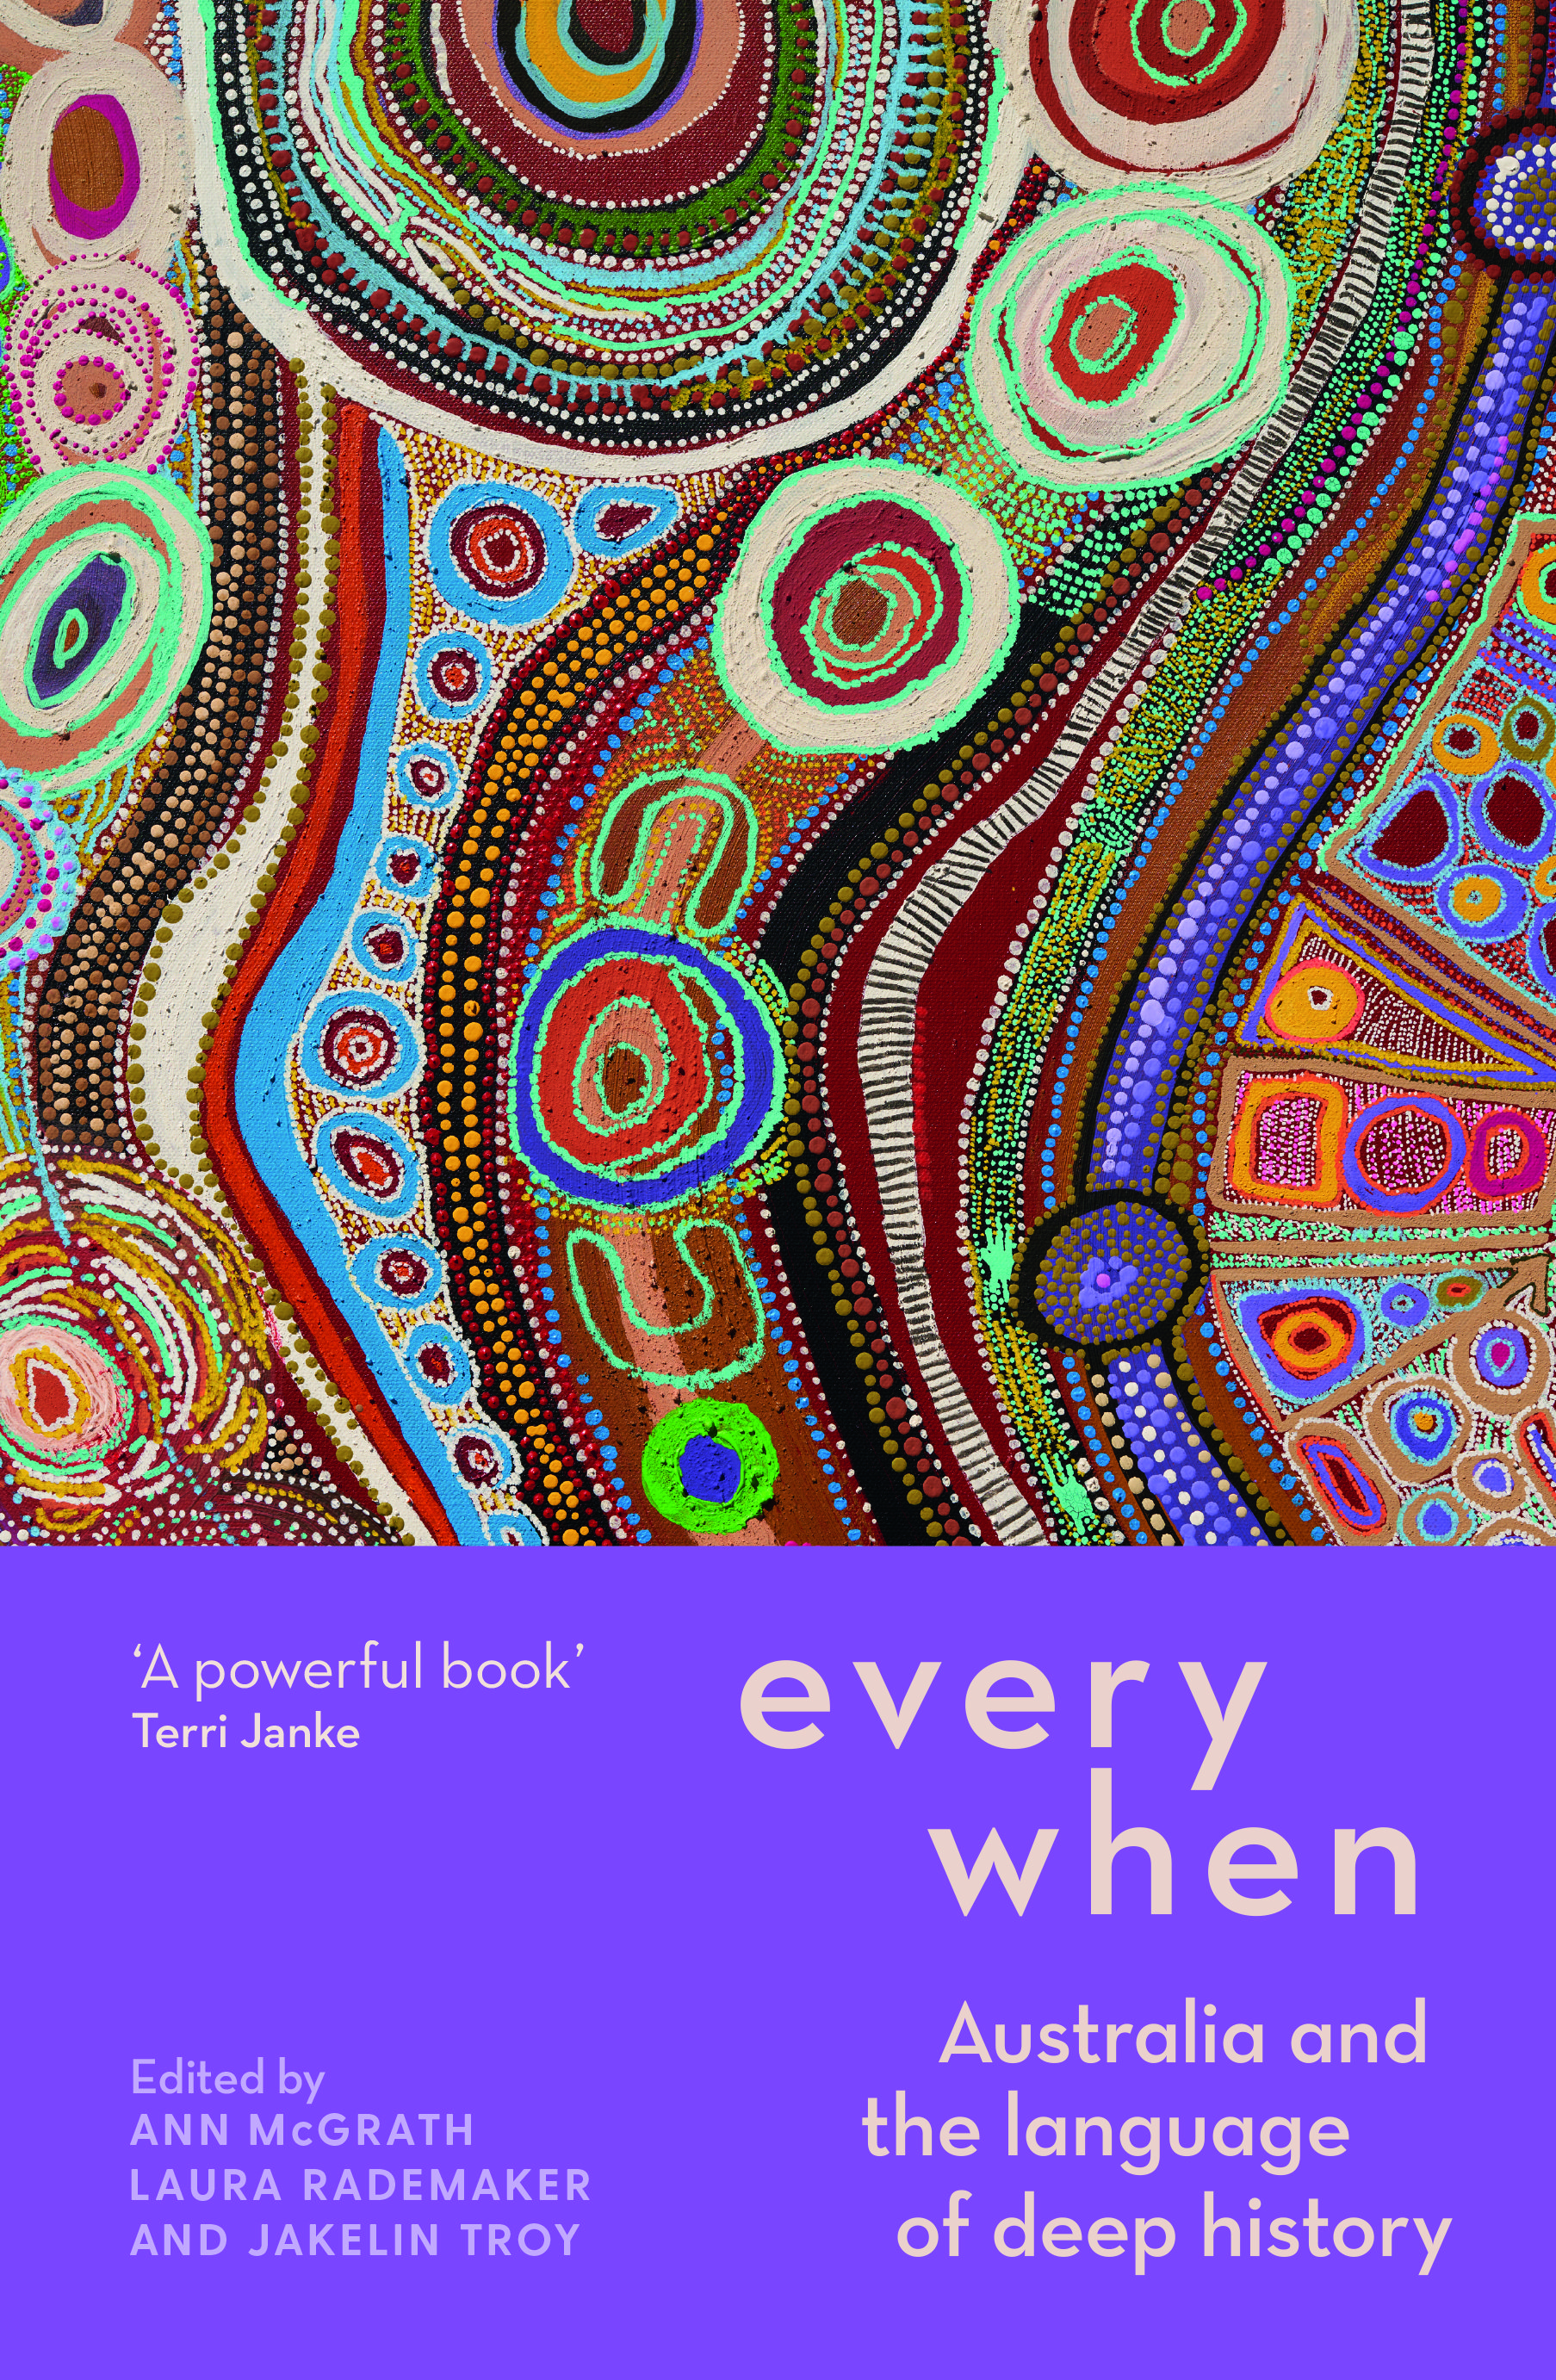 Everywhen: Australia and the language of deep history